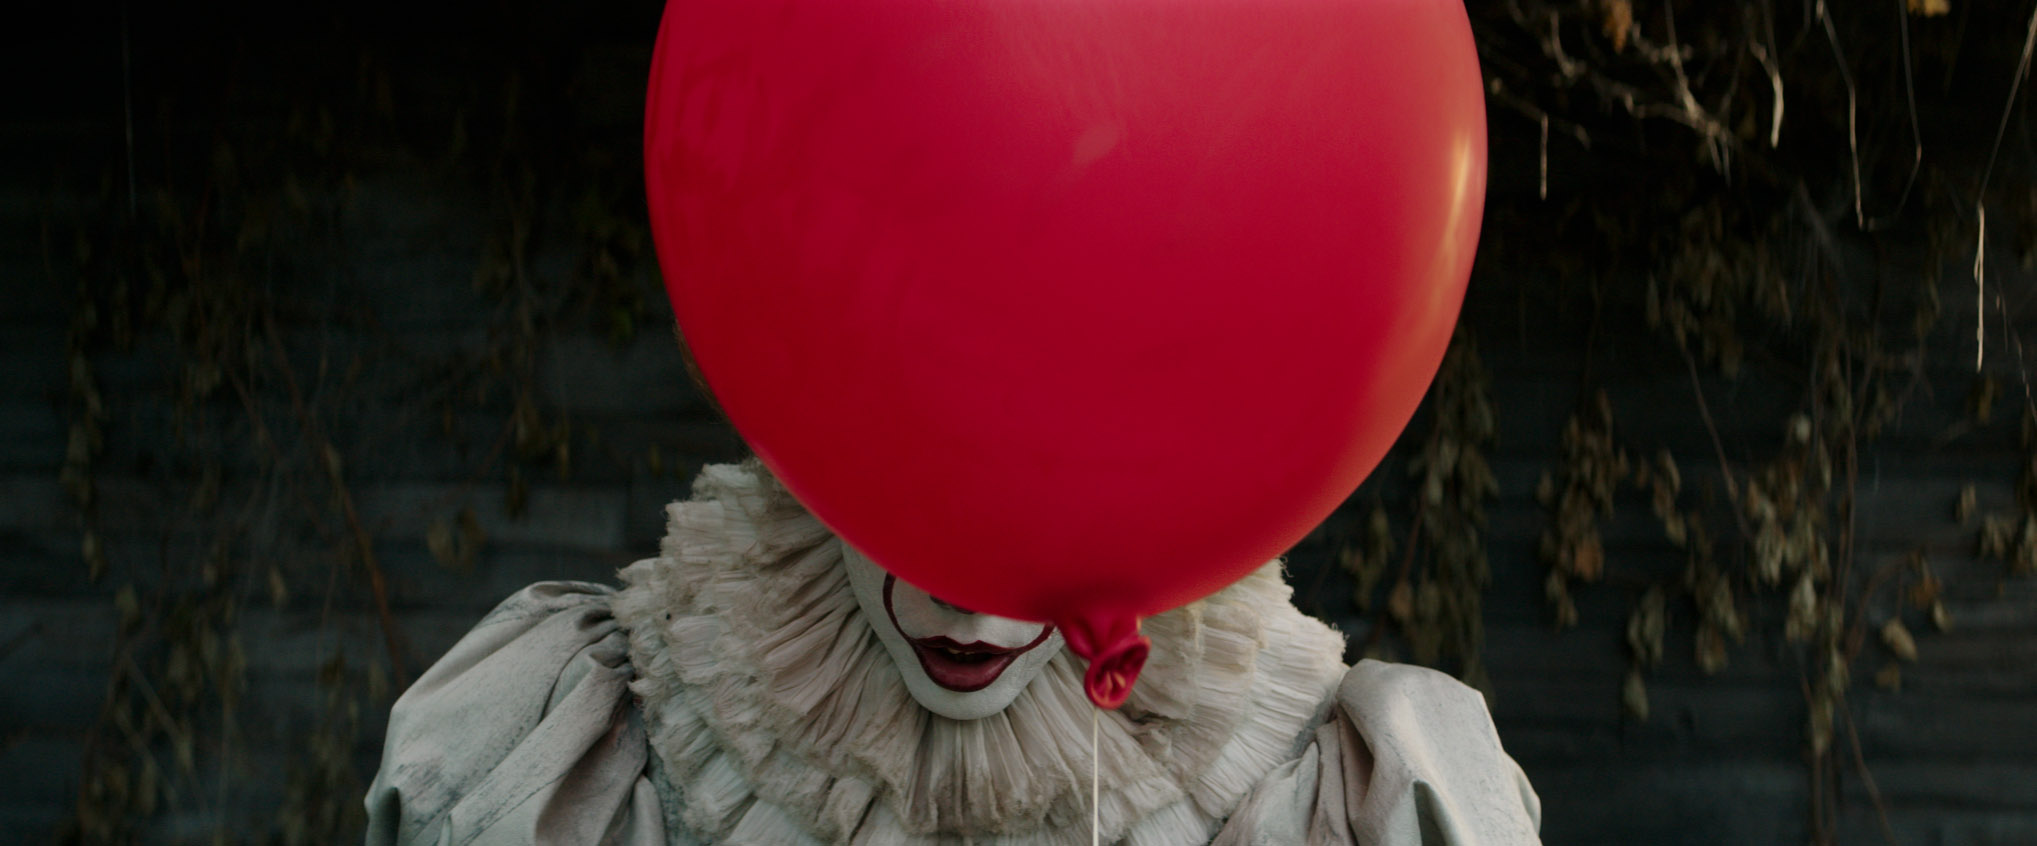 ‘It’ Film Review: You’ll Be Scared of the Clown Too